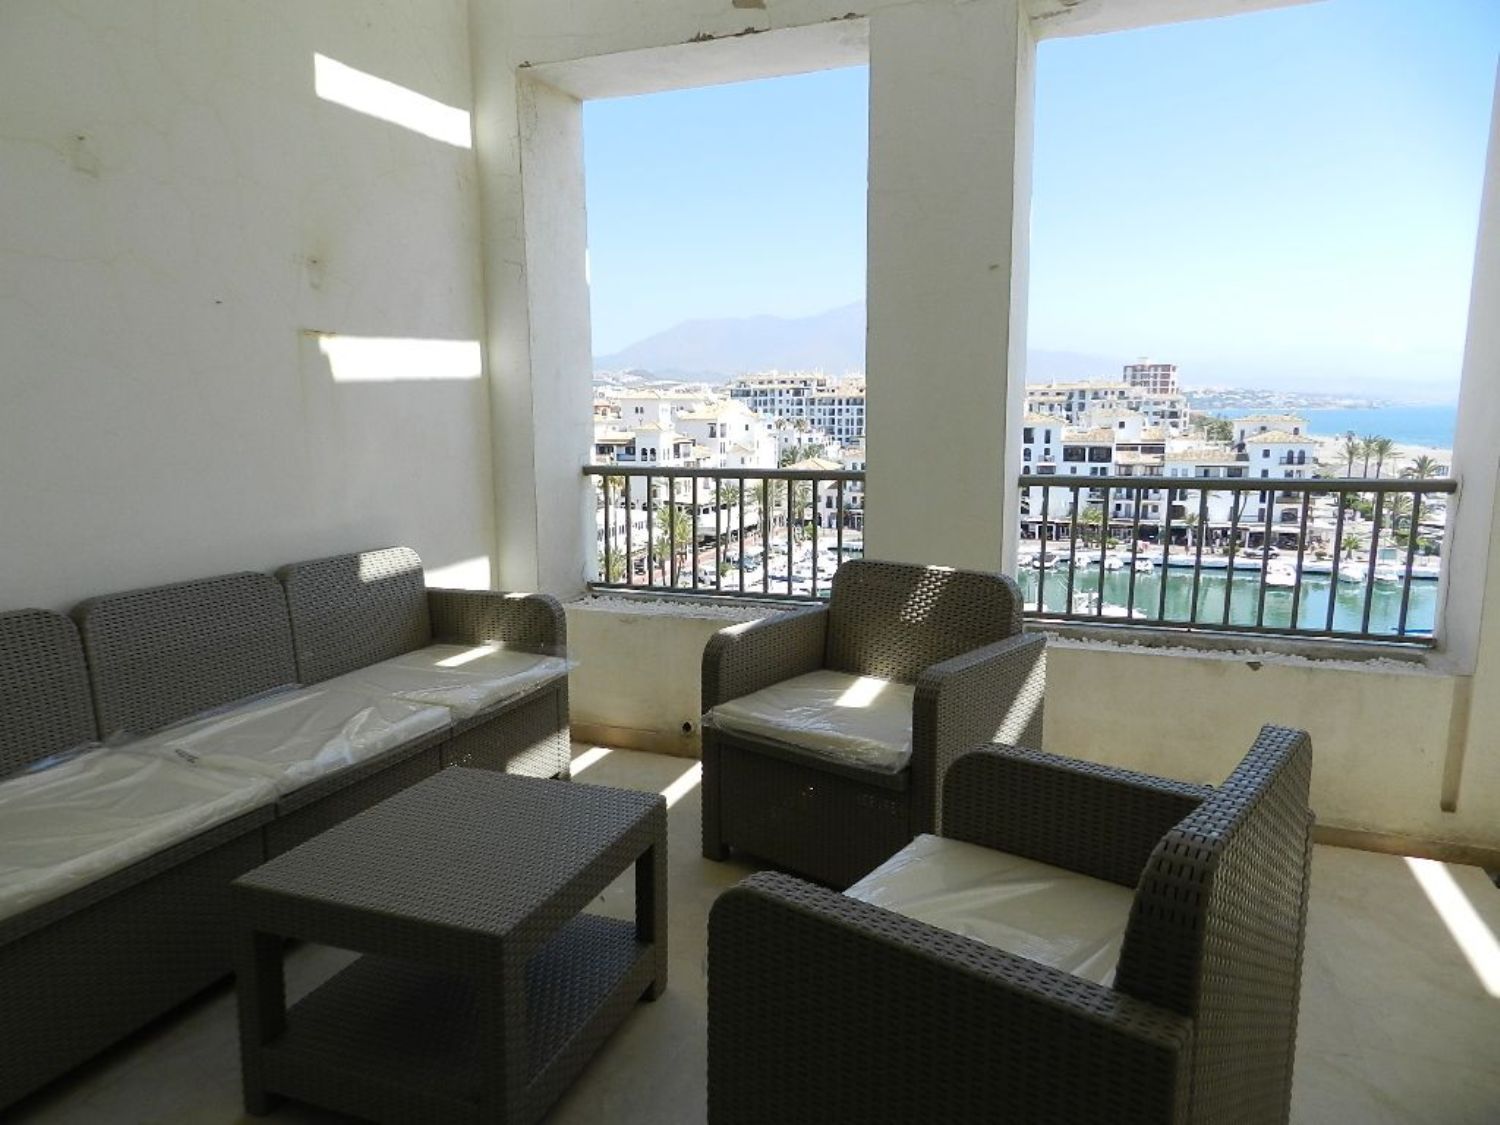 Apartment for sale on the seafront on Calle Delfín, in Manilva